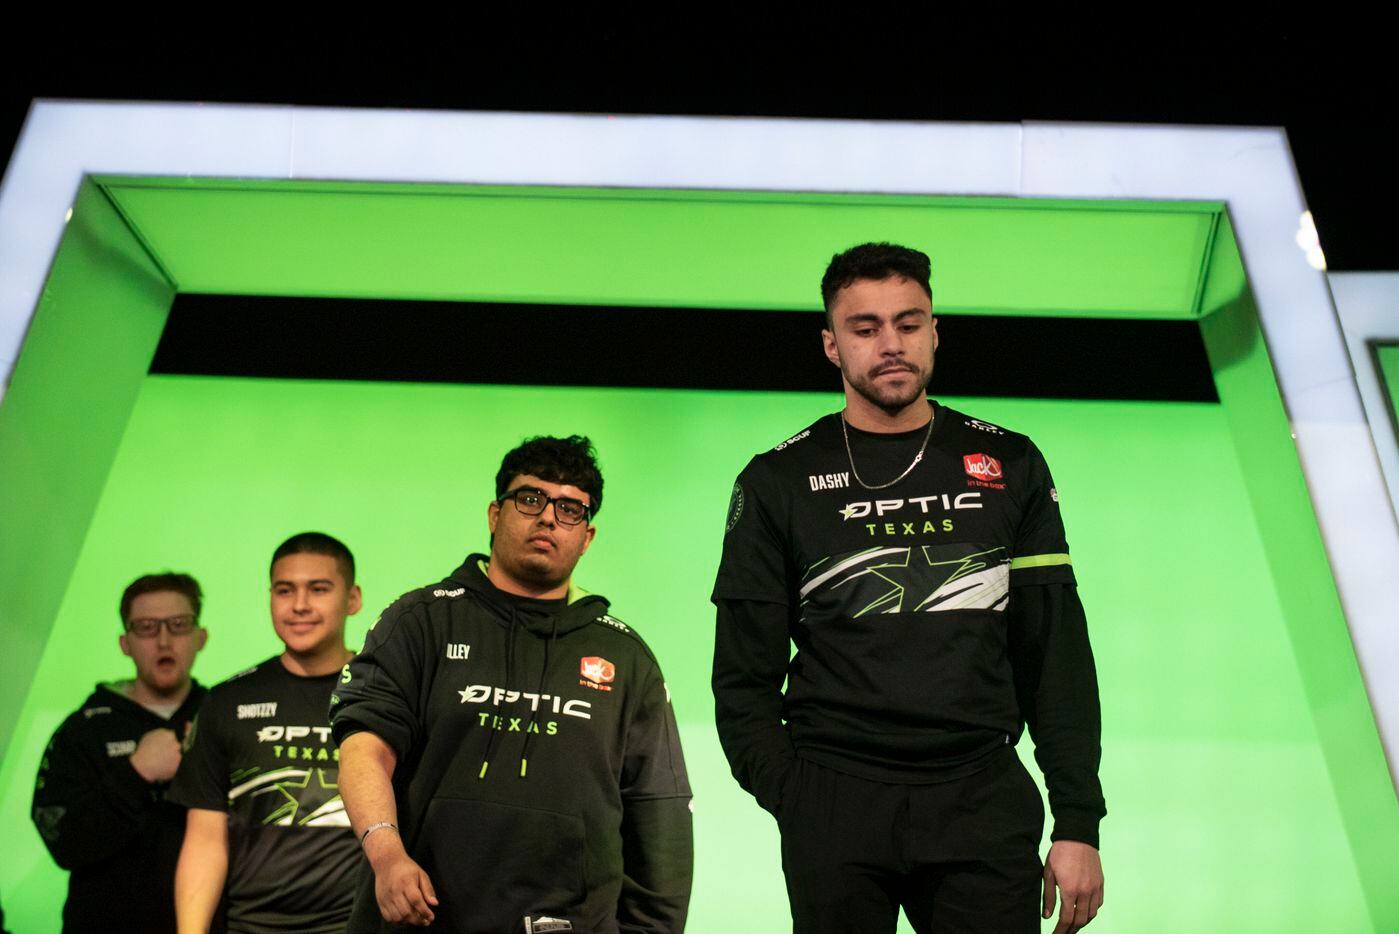 Members of OpTic Texas, Bradon “Dashy” Otell, Indervir “Illey” Dhaliwal, Anthony “Shotzzy”...